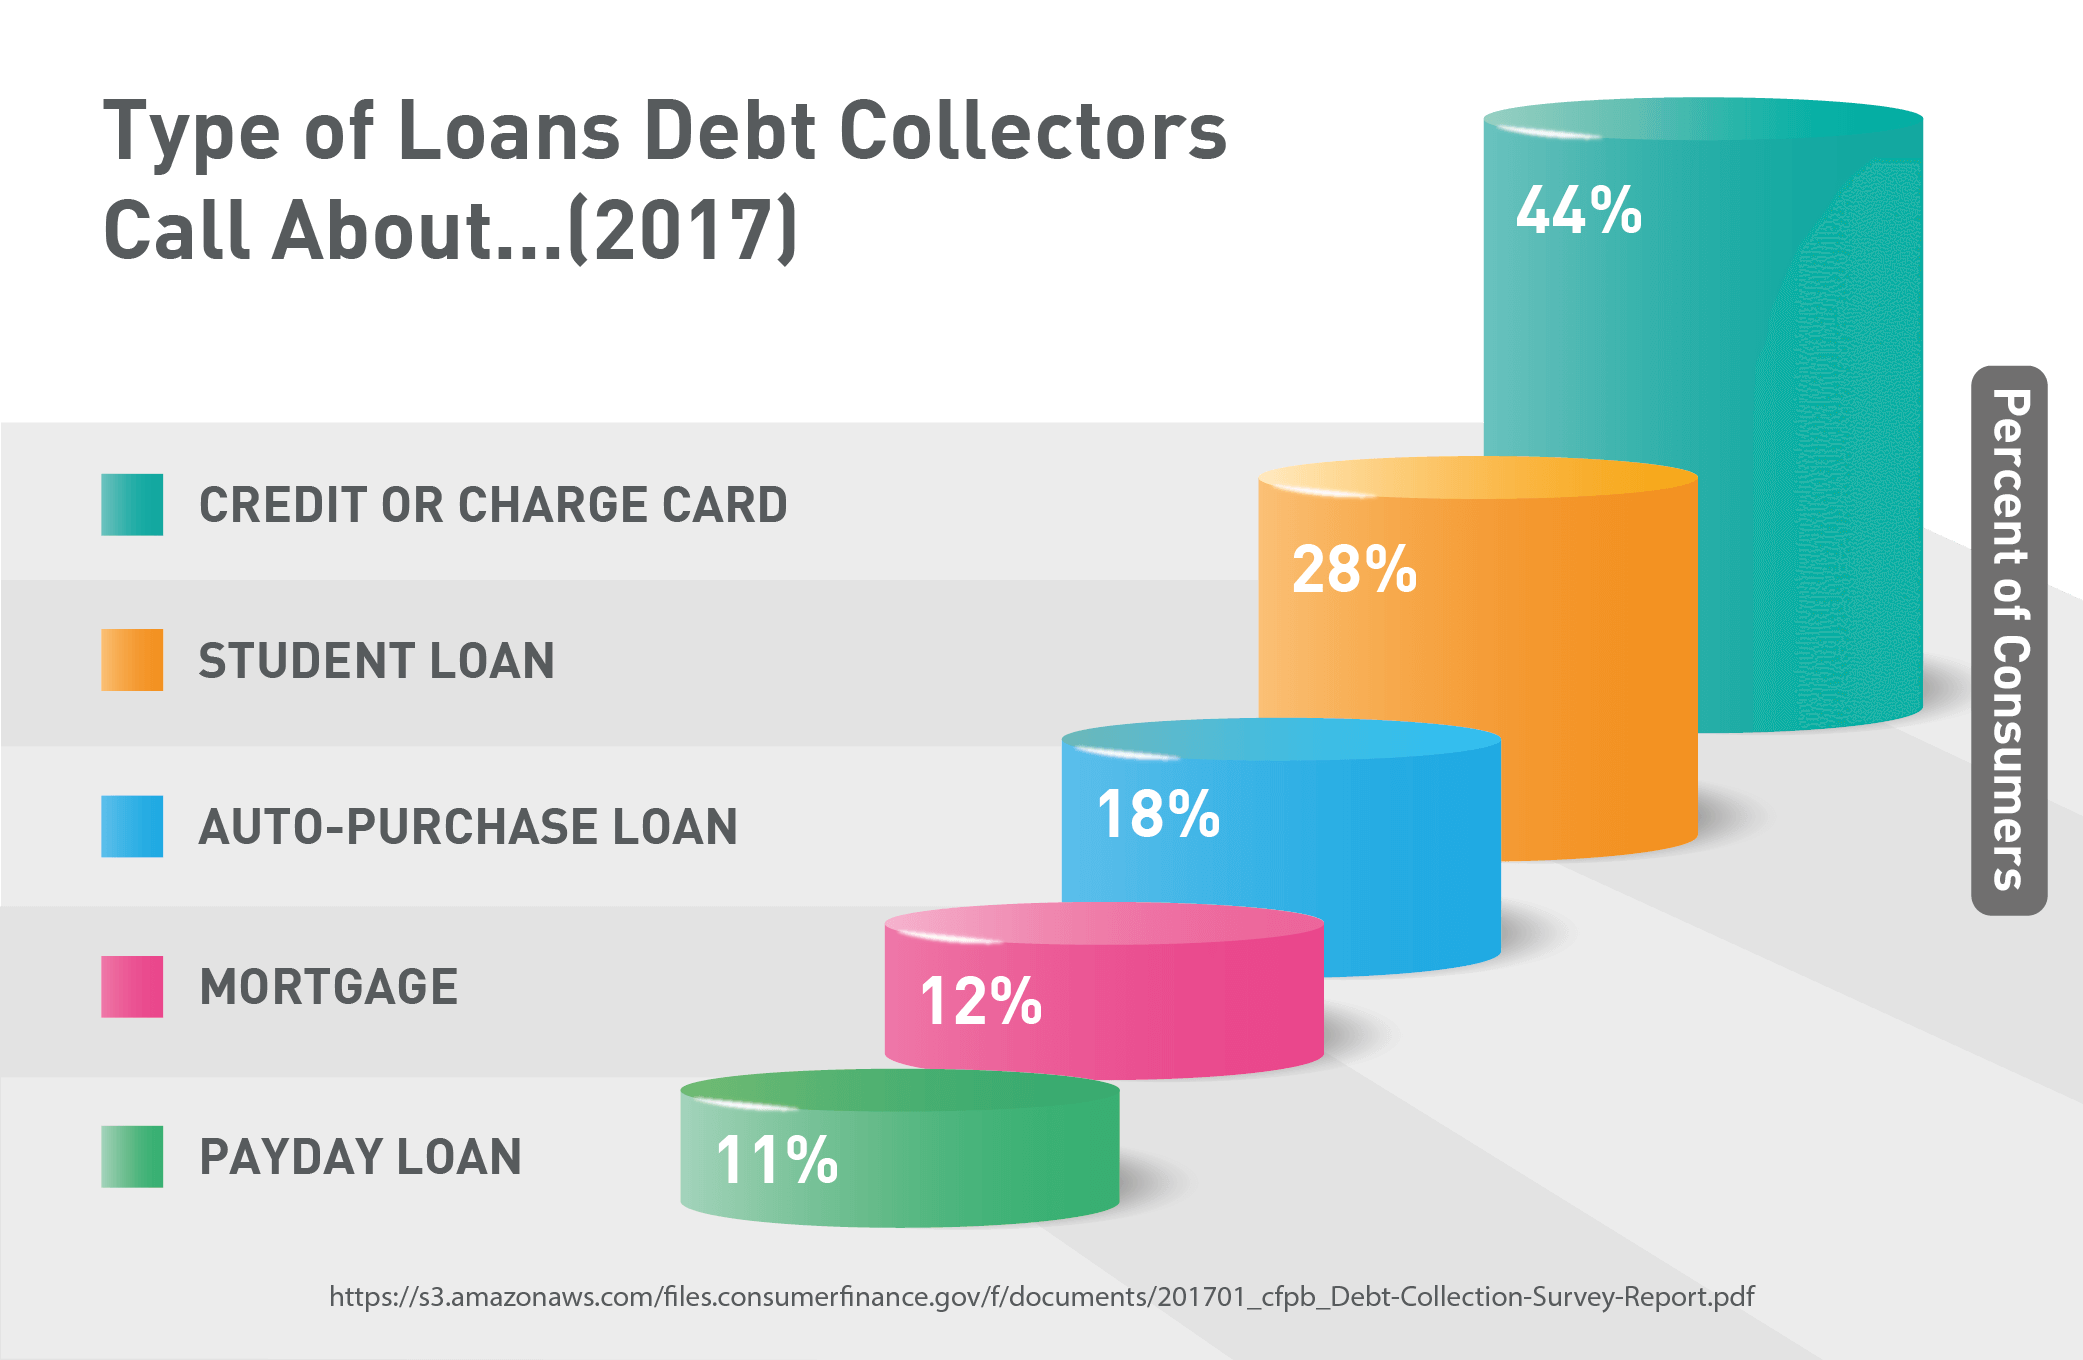 Types of Loans Consumers Were Contacted About By Debt Collectors (2017)